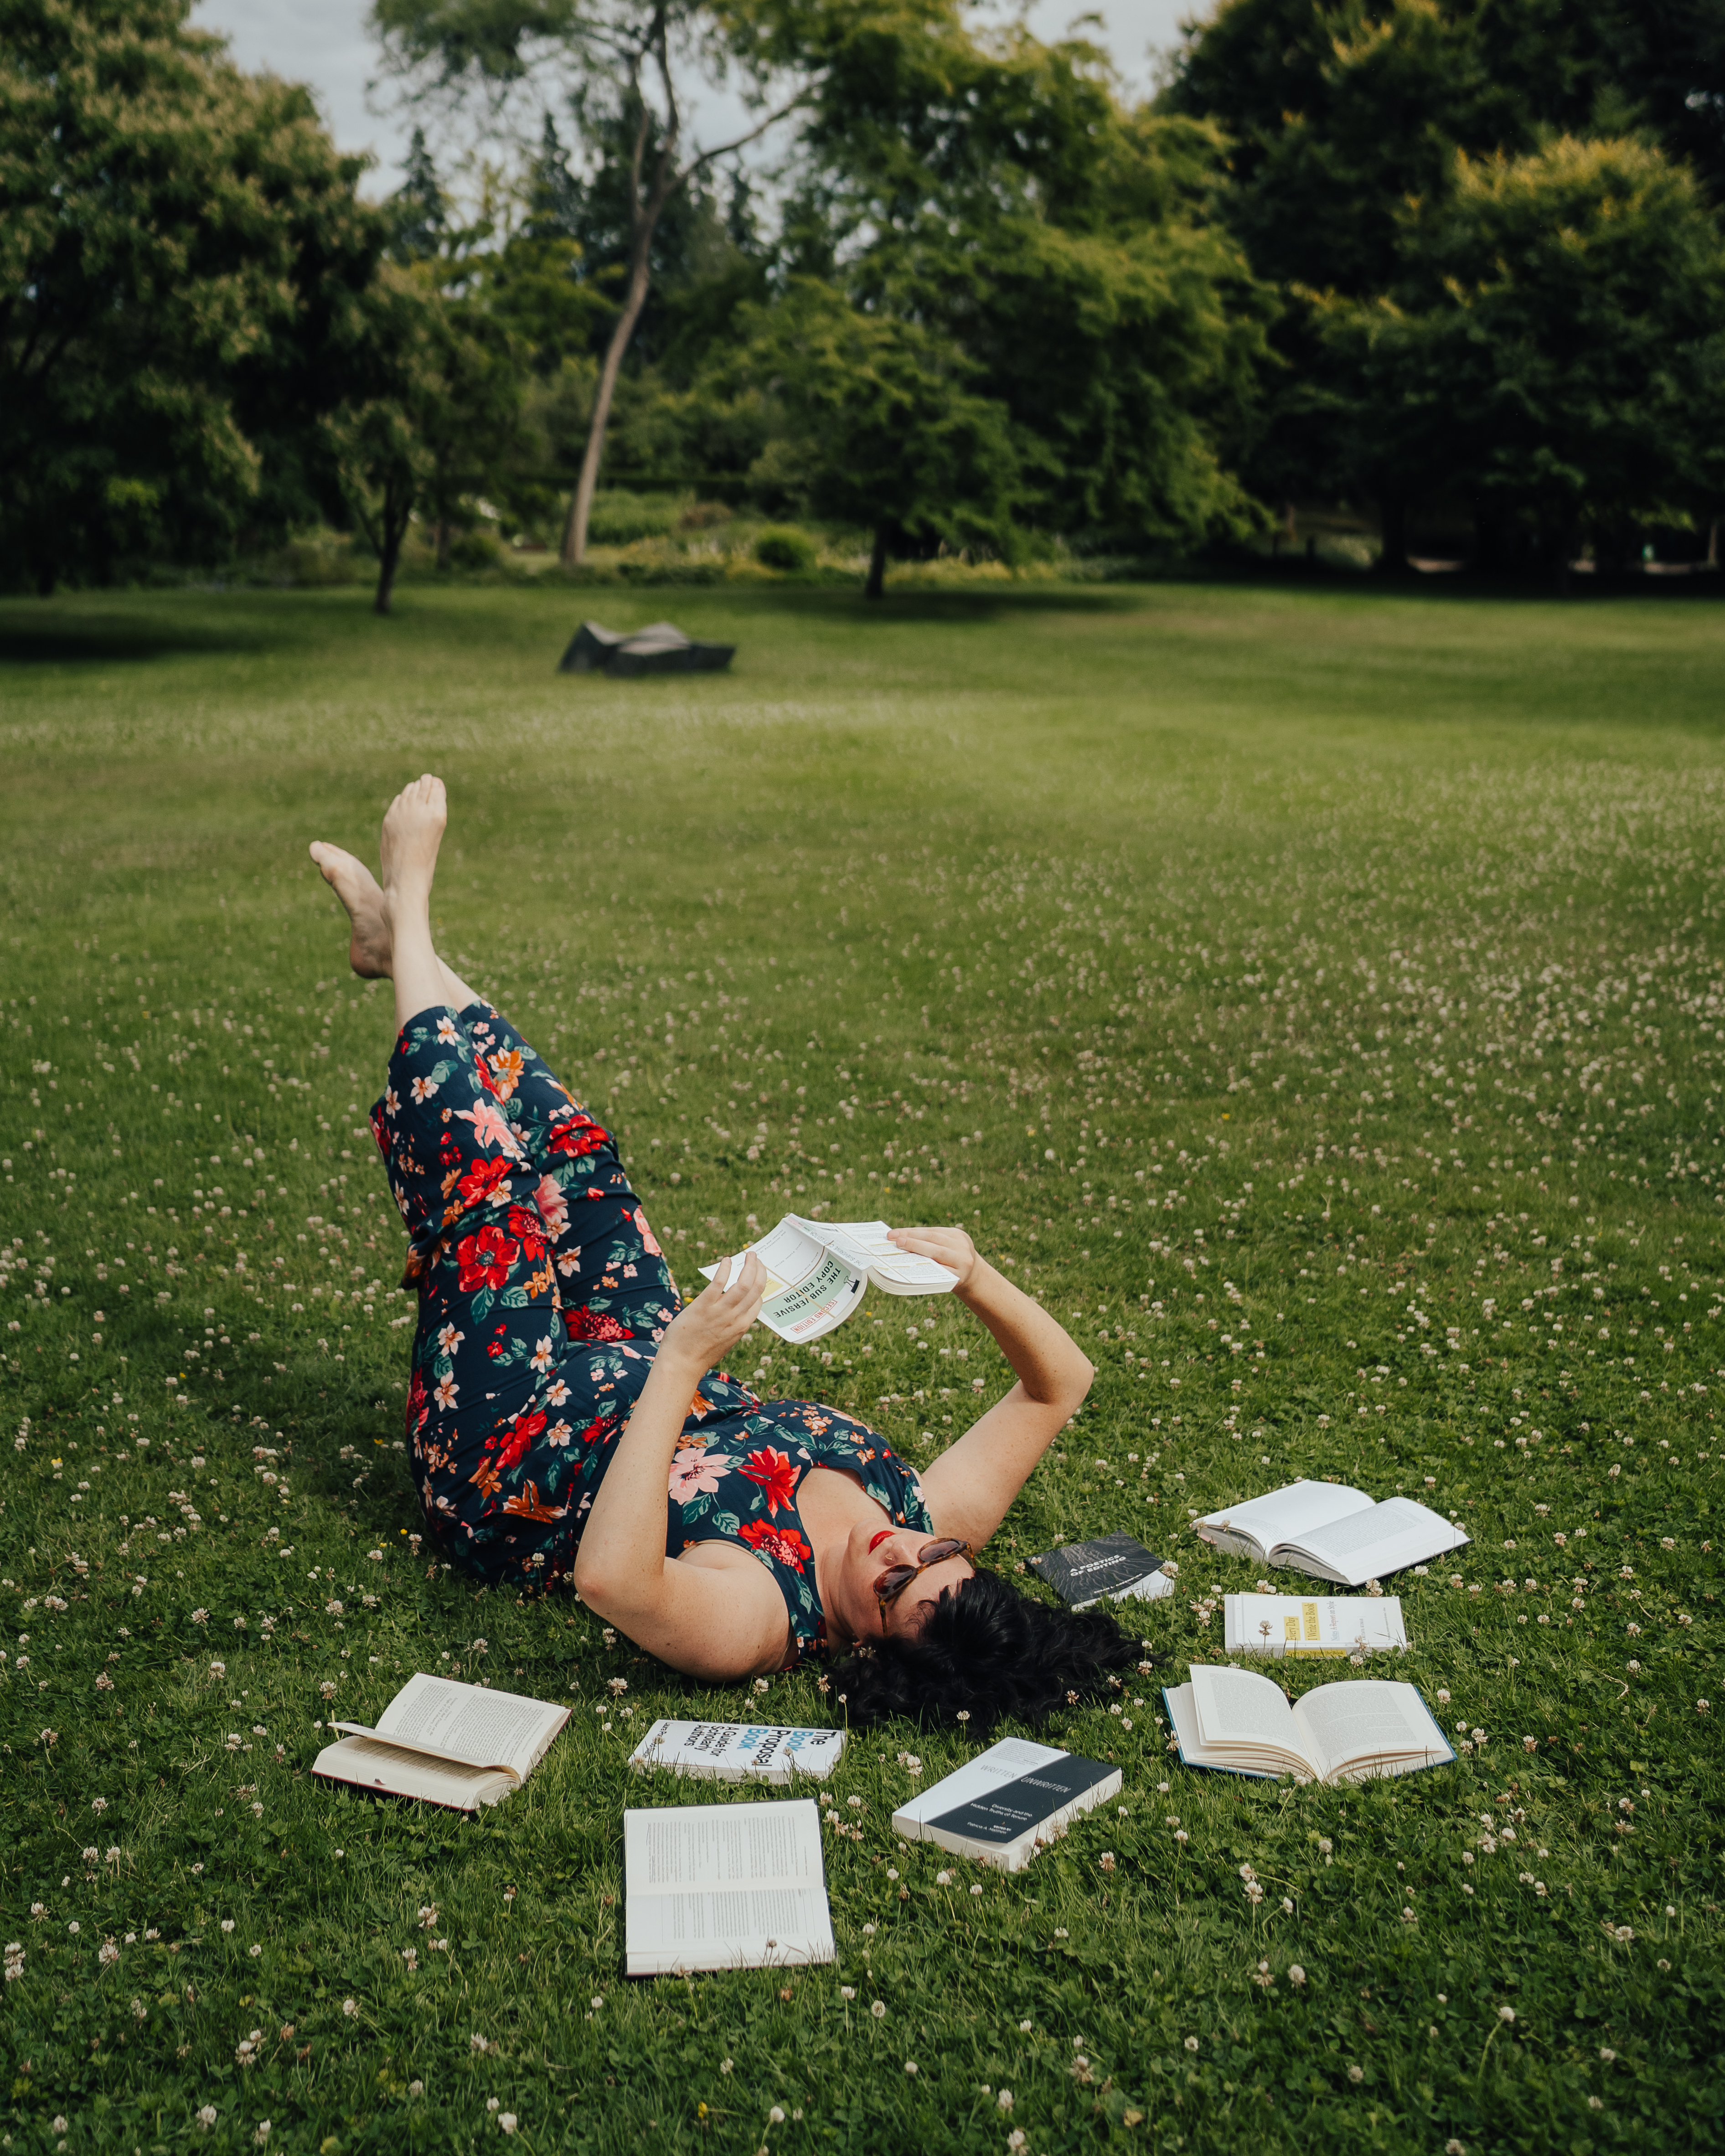 A picture of Letitia Henville, lying on the grass, reading a book. She is wearing sunglasses and a colourful floral jumpsuit.